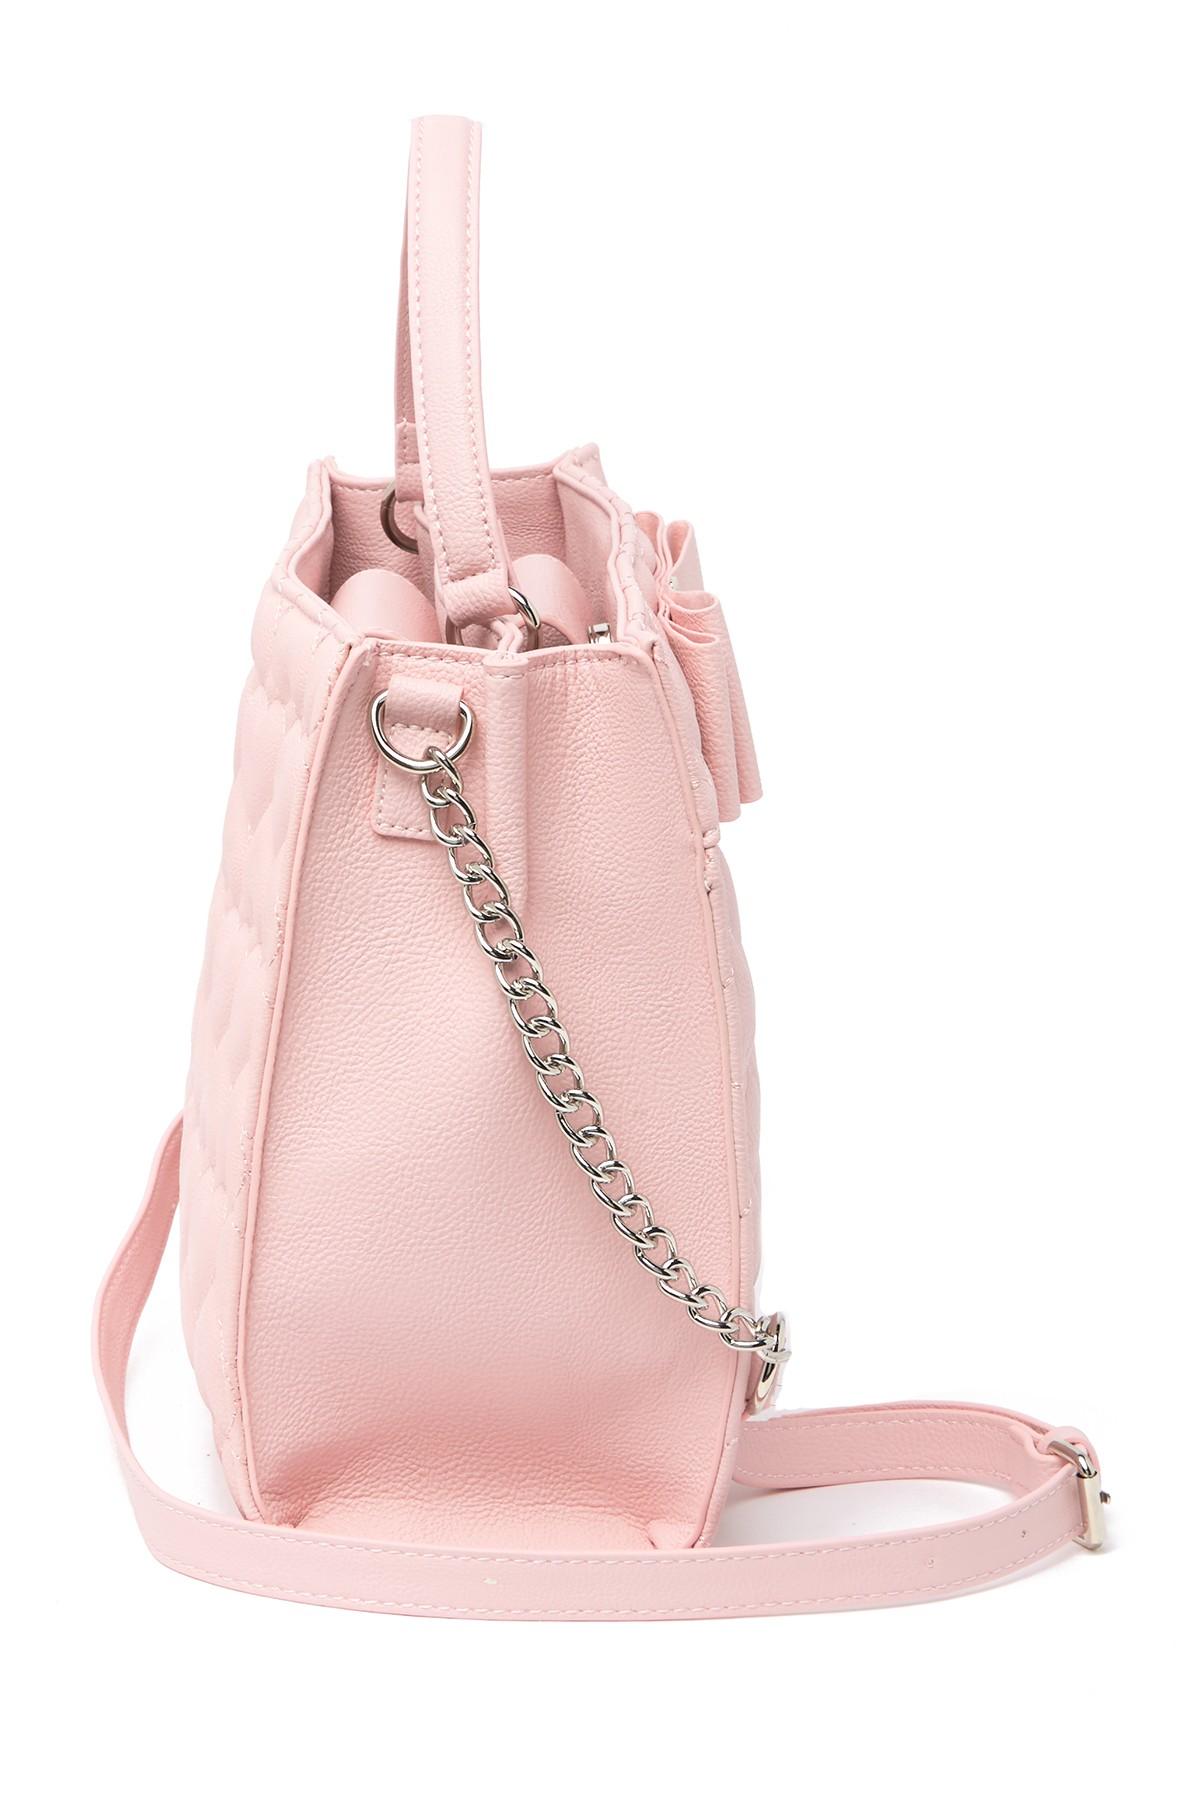 Betsey Johnson Quilted Heart Satchel in Blush (Pink) | Lyst